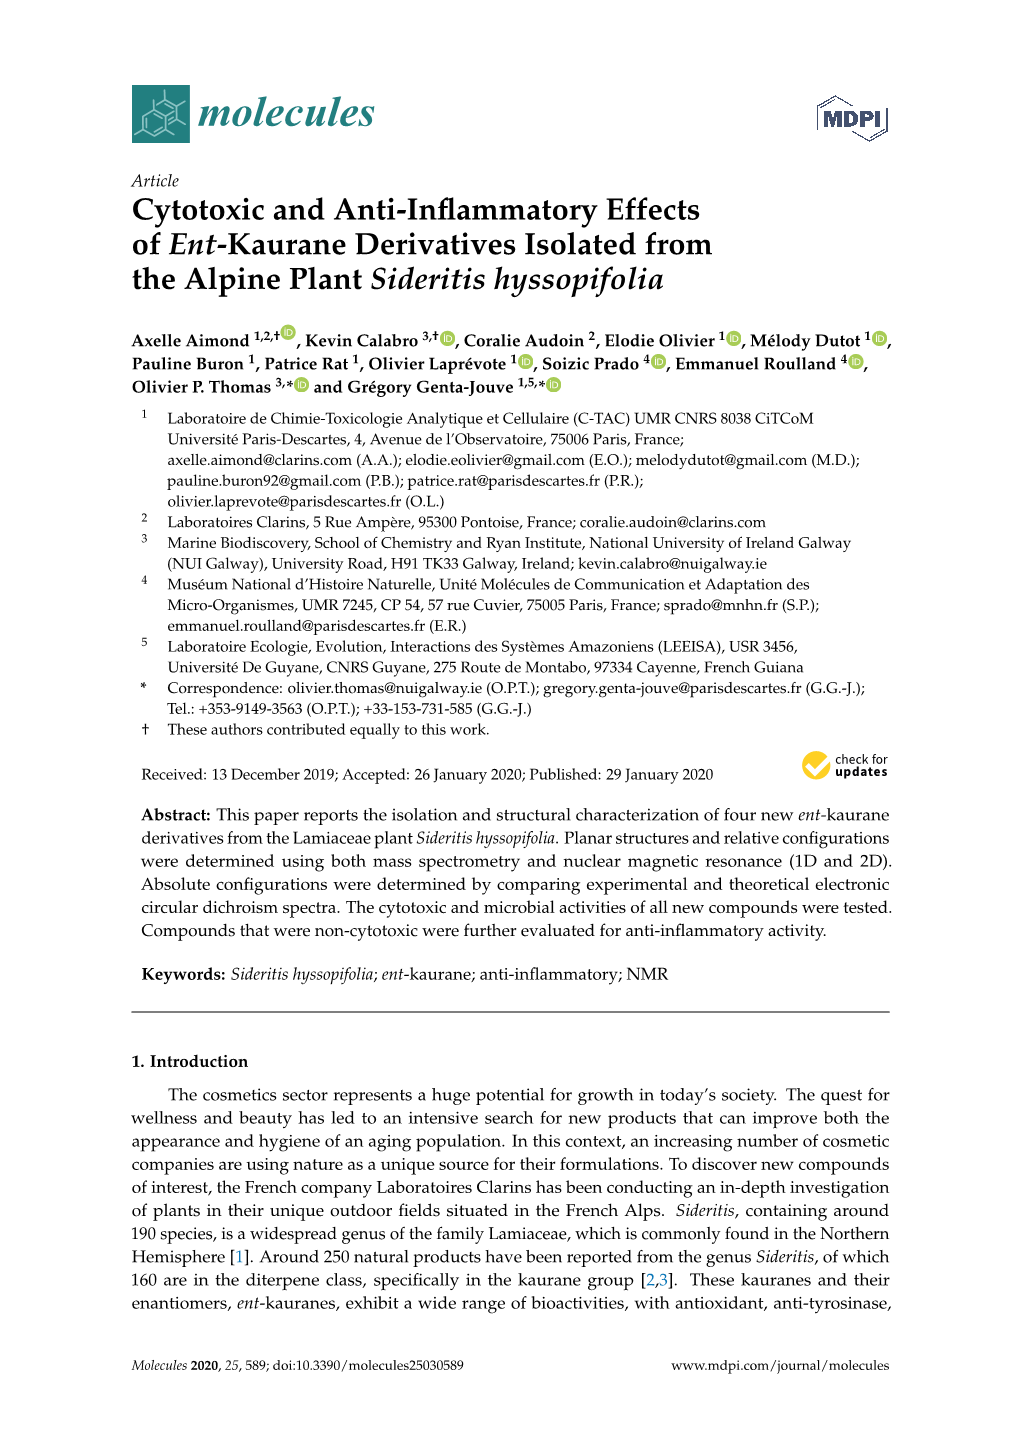 Cytotoxic and Anti-Inflammatory Effects of Ent-Kaurane Derivatives